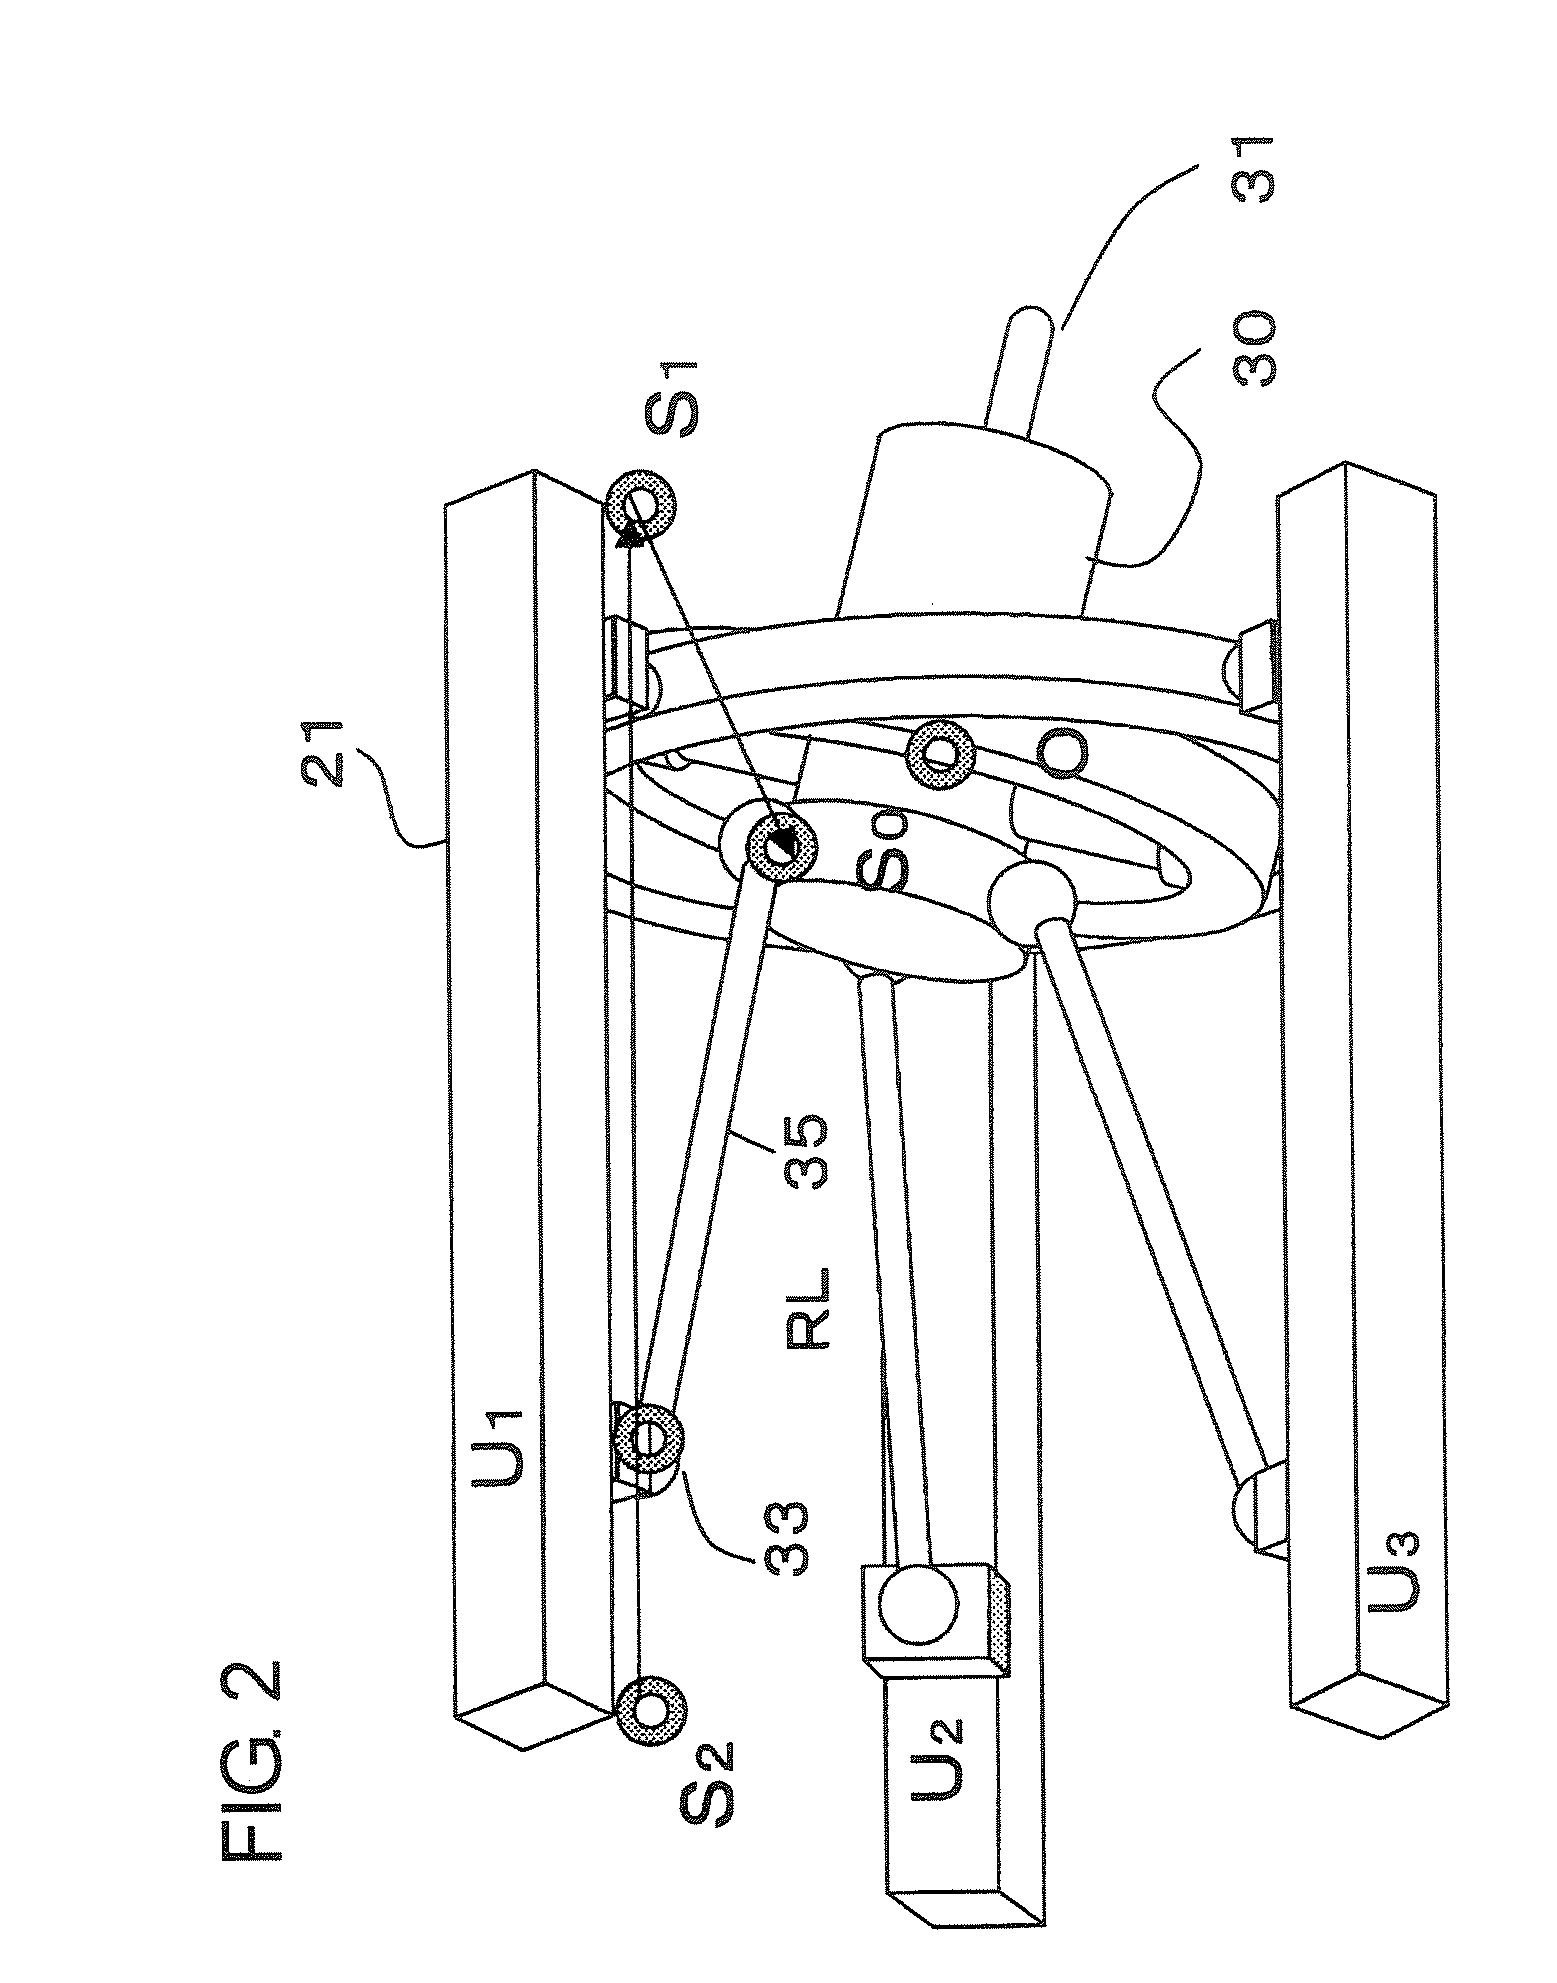 Three degree of freedom parallel mechanism, multi-axis control machine tool using the mechanism and control method for the mechanism